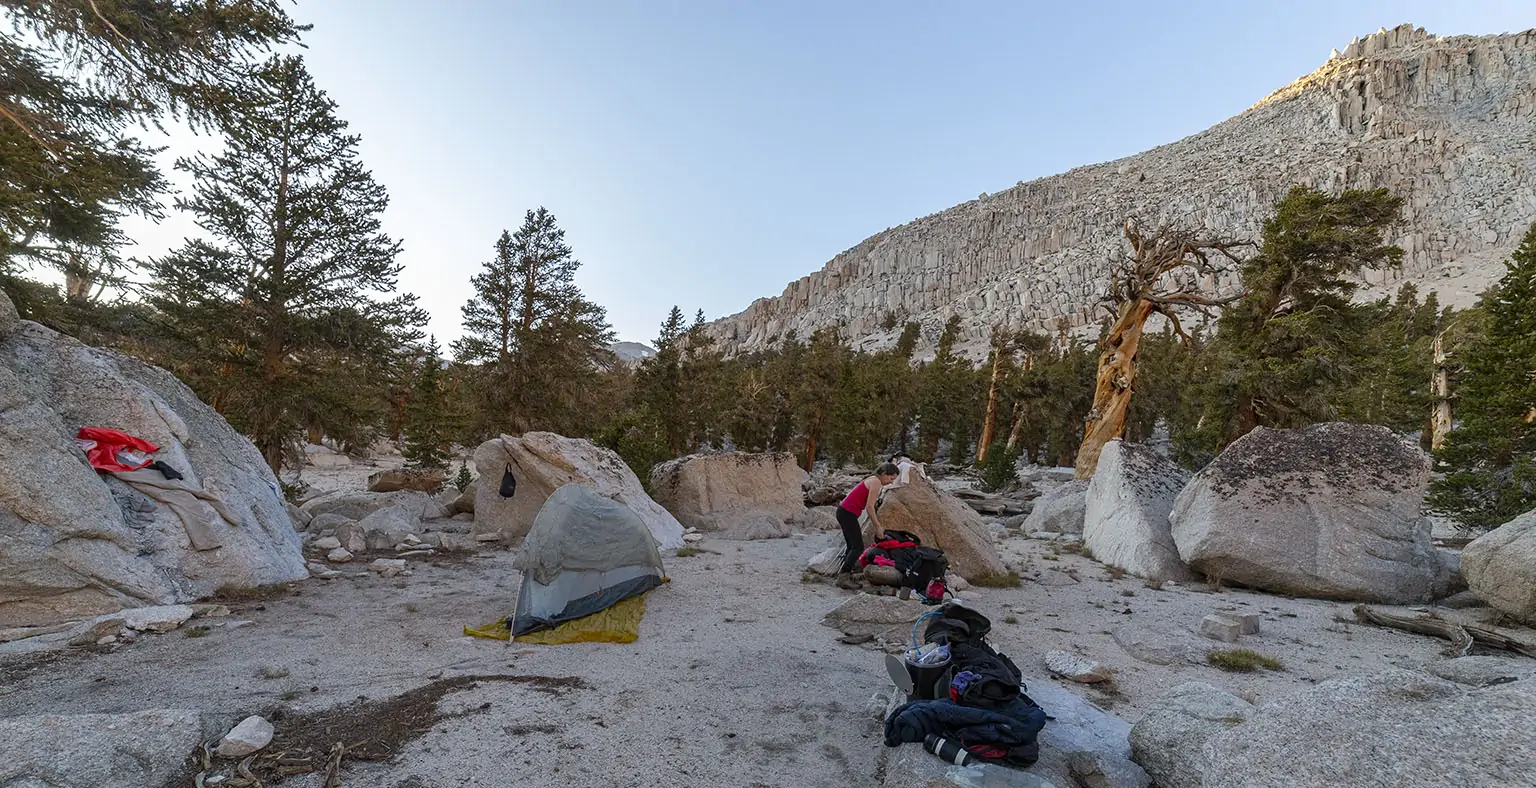 Our camp near Upper Soldier Lake